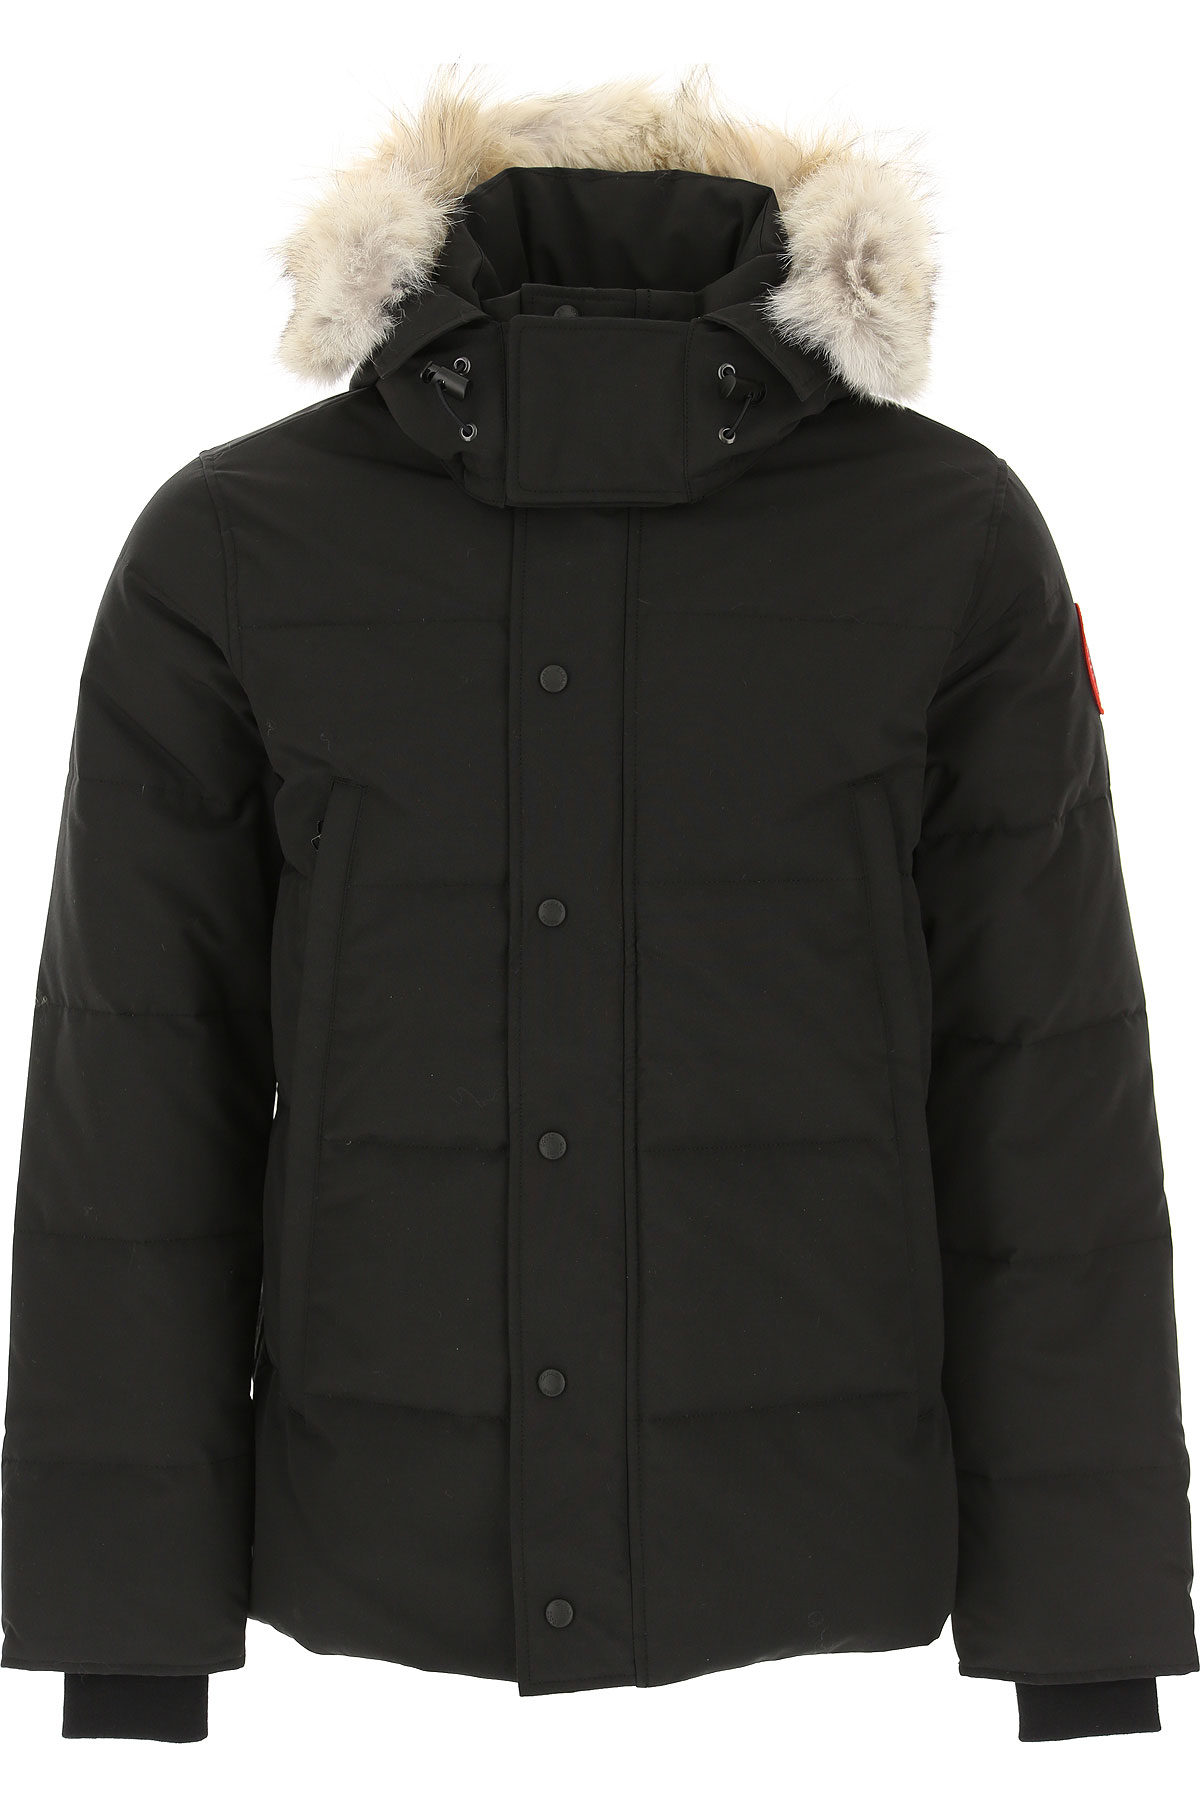 Mens Clothing Canada Goose, Style code: 3808m-61-